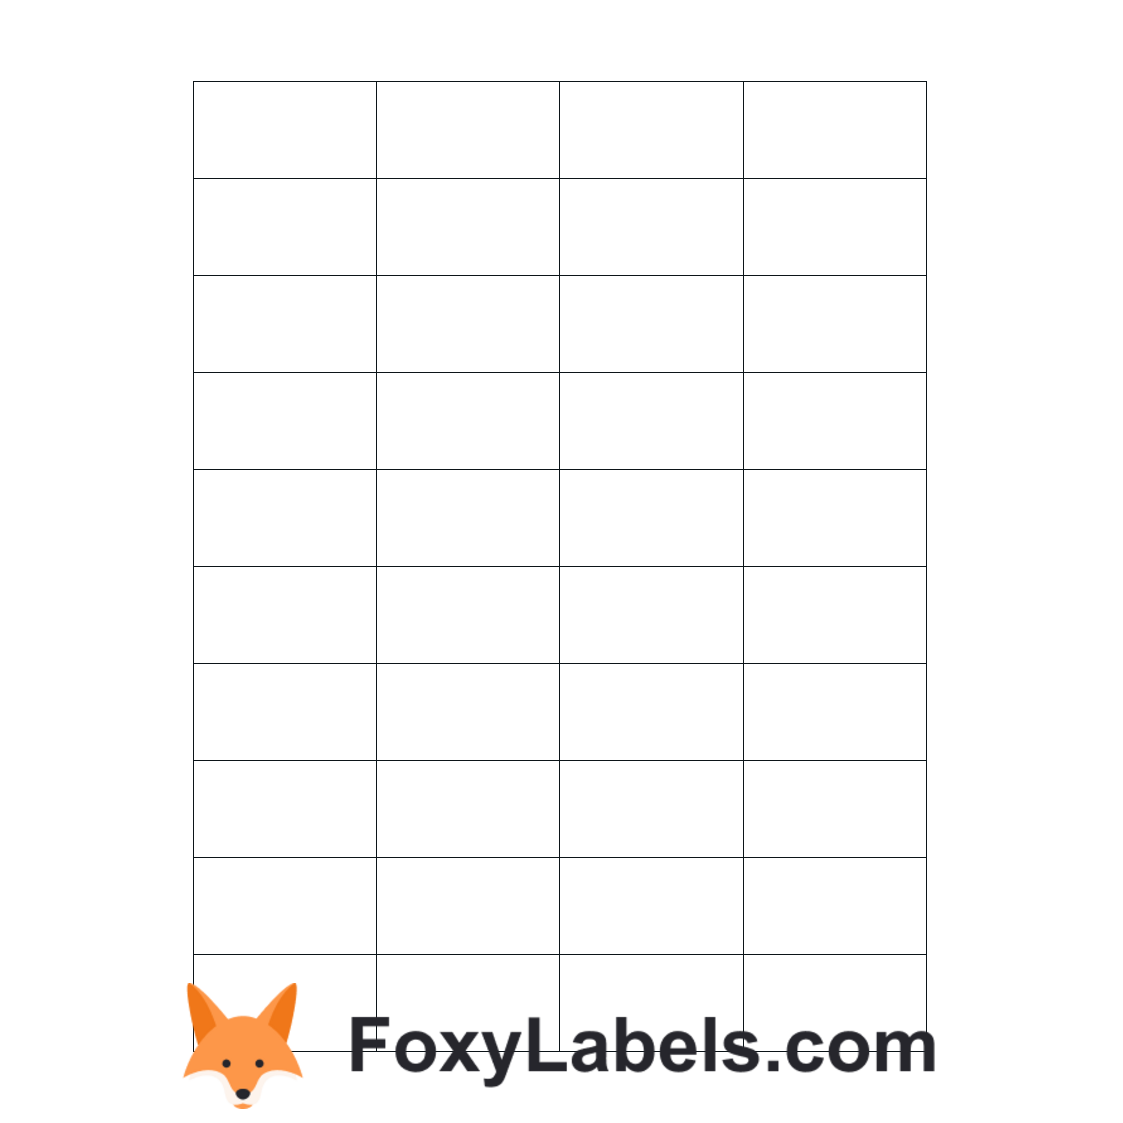 Avery-Zweckform 6126 label template for Google Docs